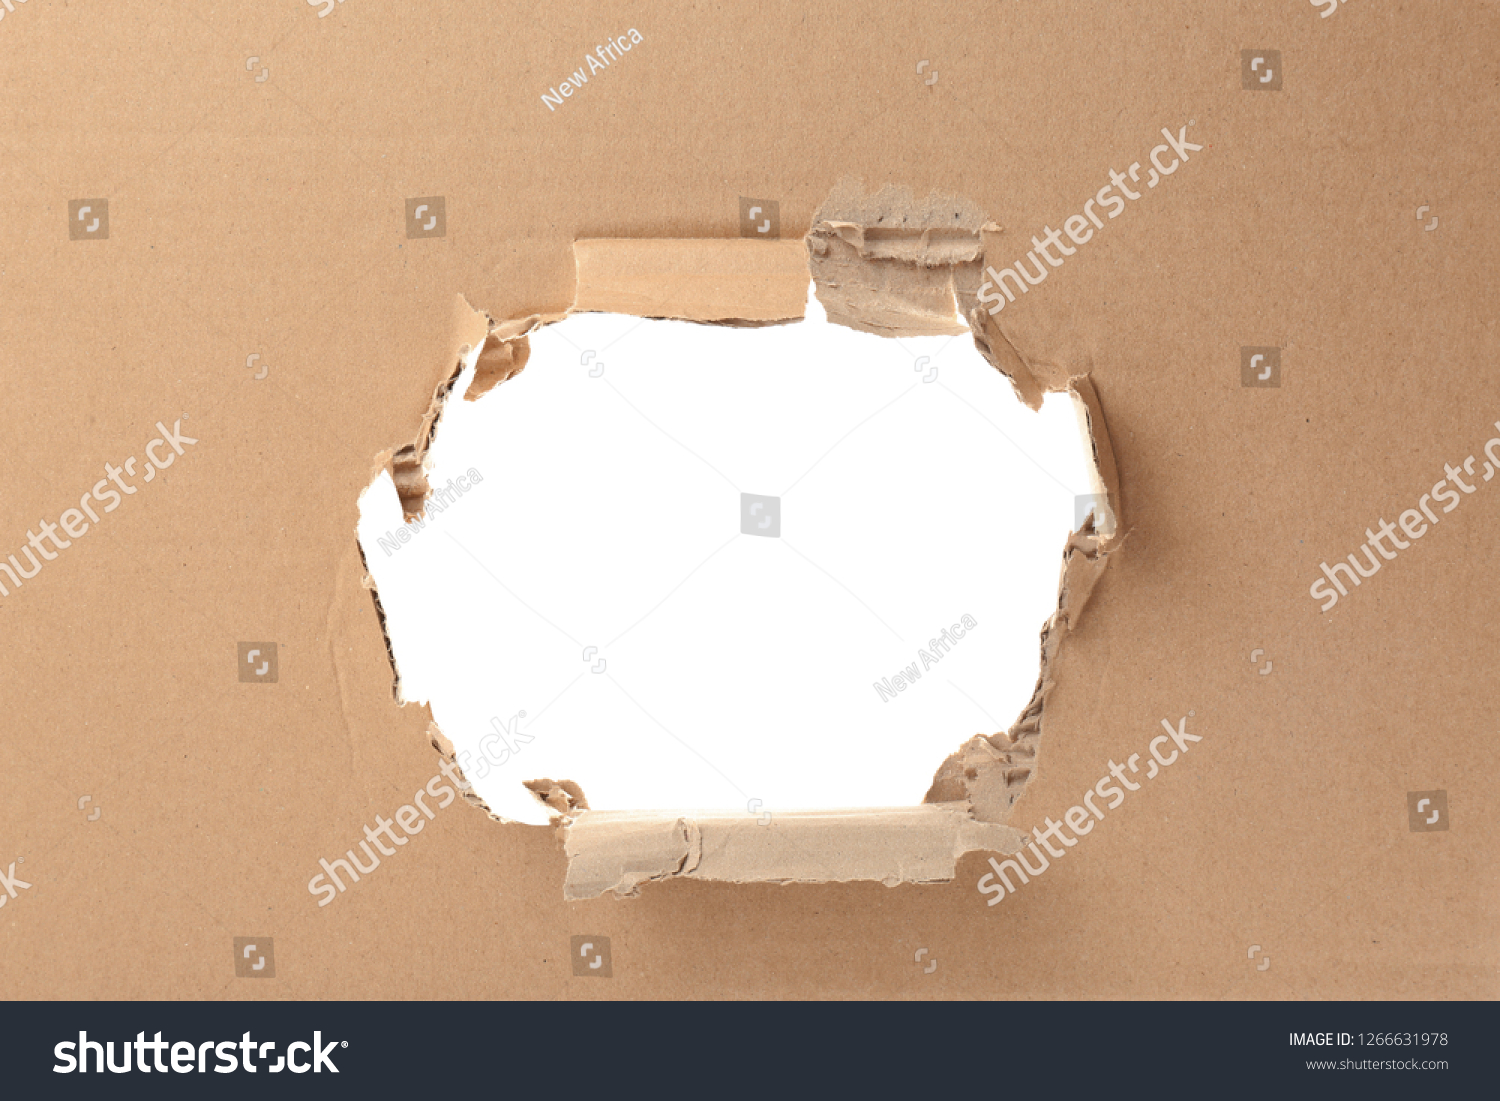 Hole in cardboard on white background. Recyclable material #1266631978